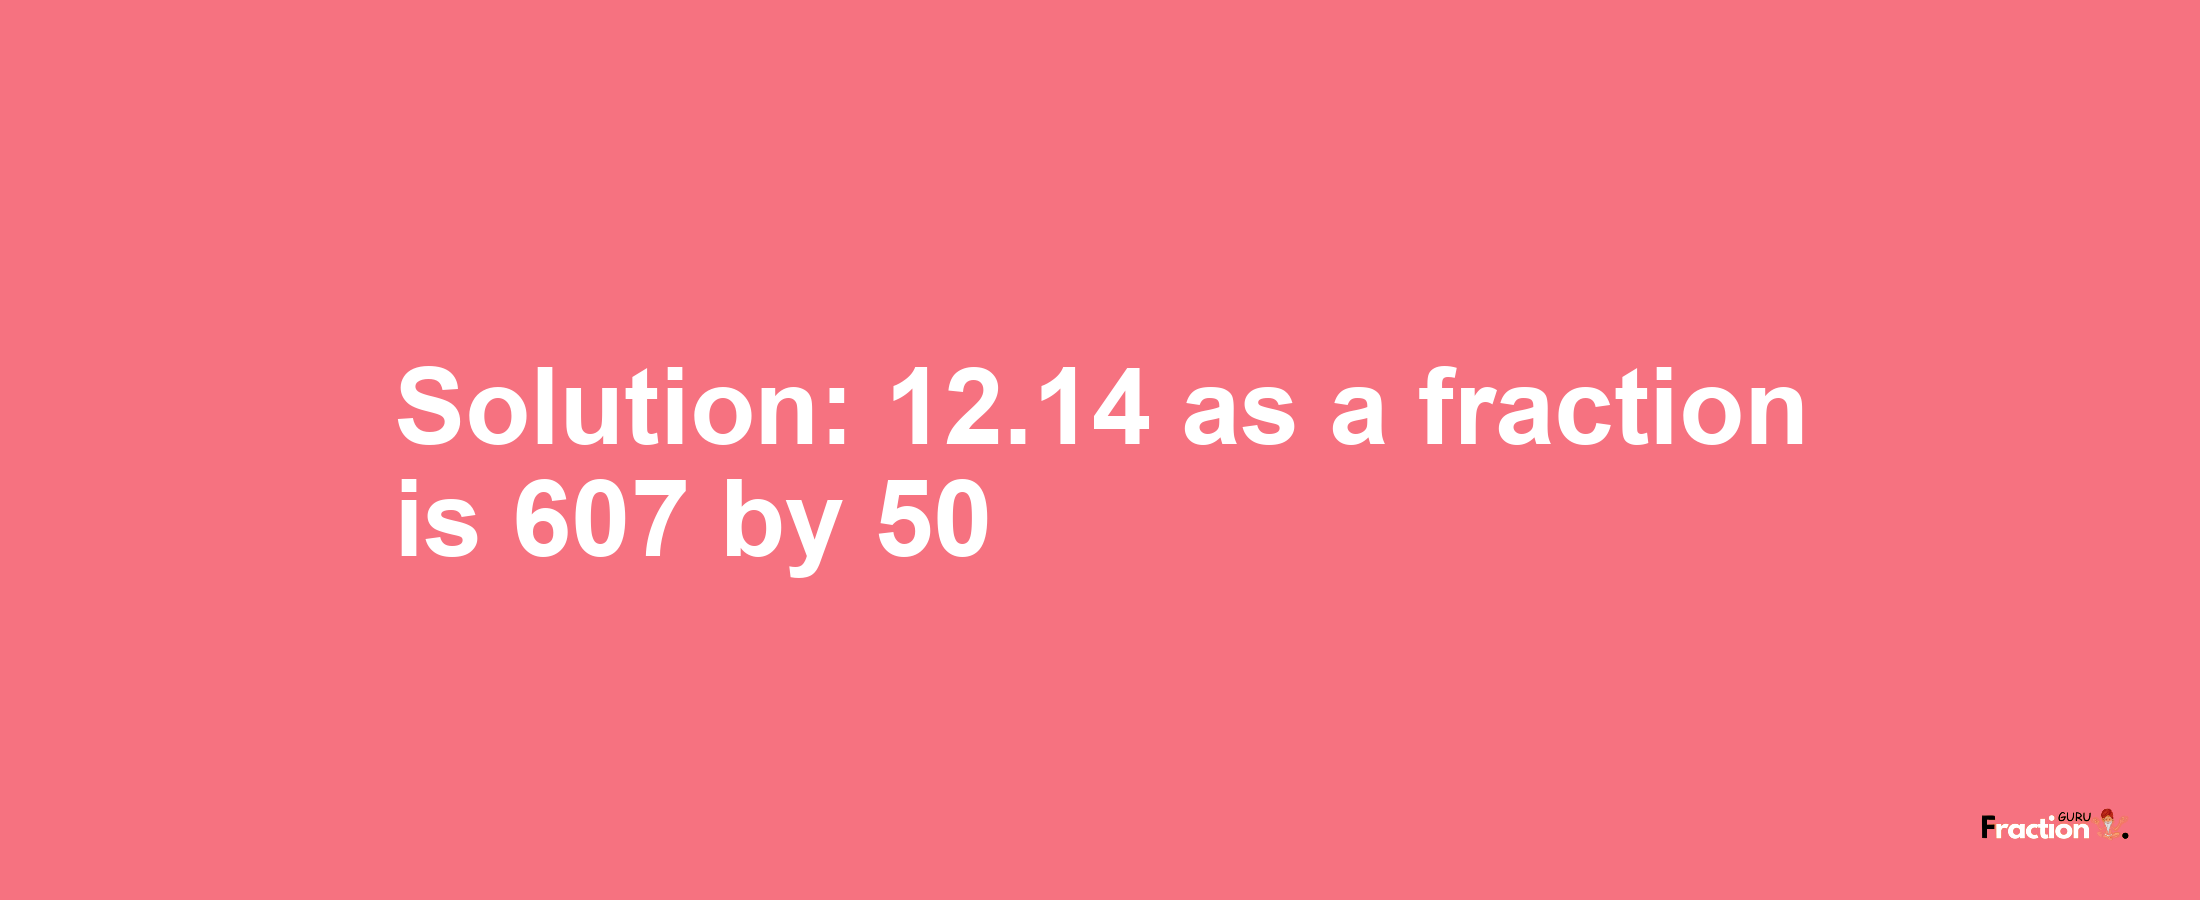 Solution:12.14 as a fraction is 607/50